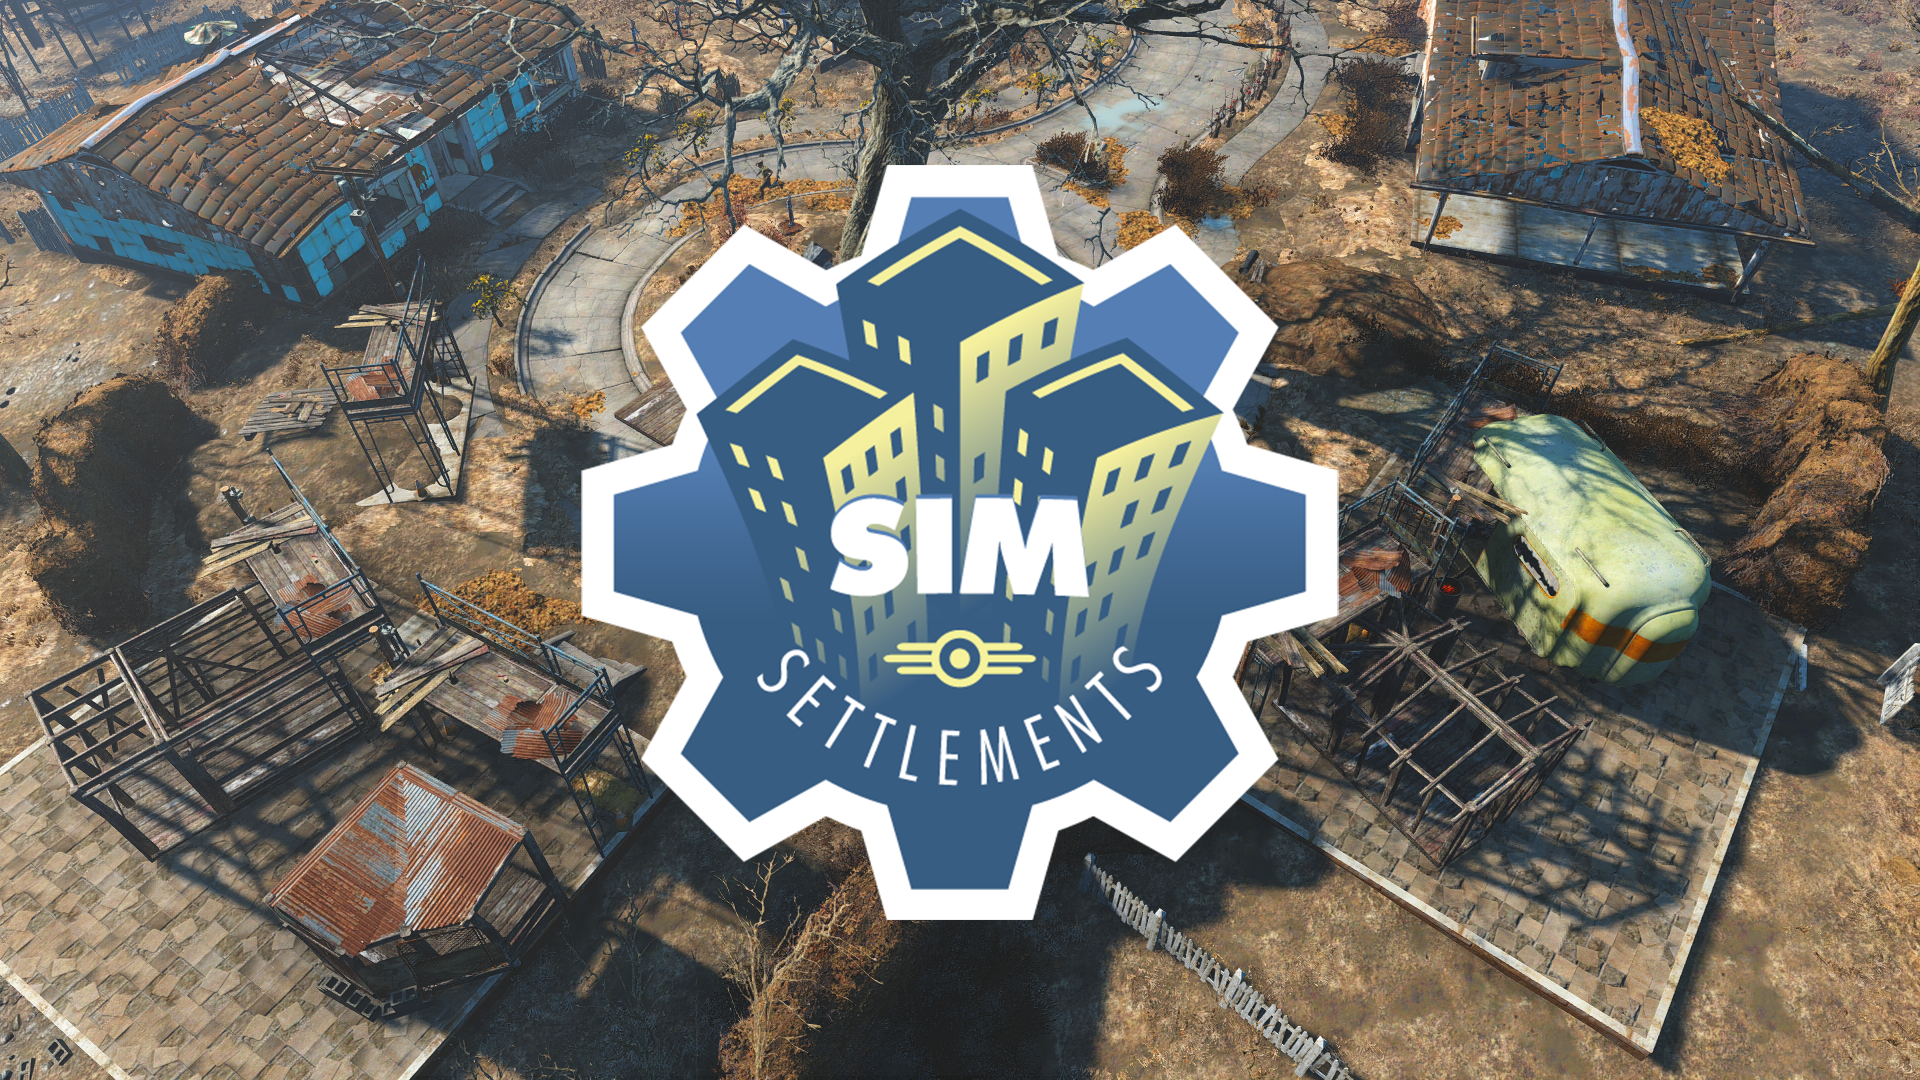 get achievements with mods fallout 4